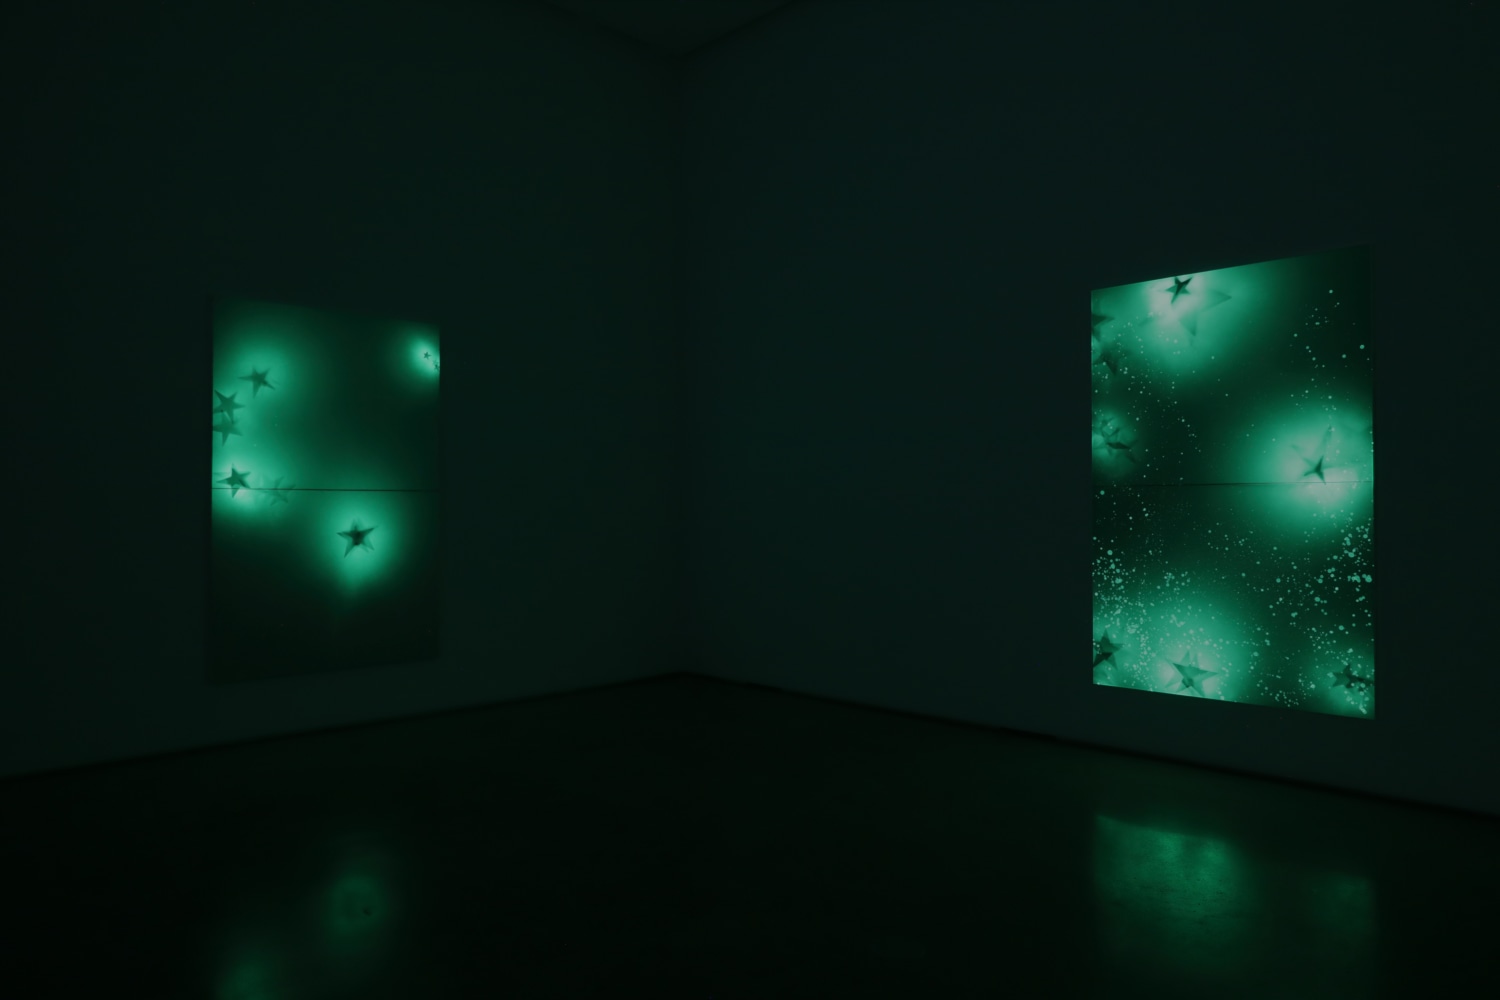 Installation view of&amp;nbsp;Koo Jeong A:2O2O&amp;nbsp;at PKM, Seoul, 2020

Courtesy of the artist &amp;amp;&amp;nbsp;PKM Gallery